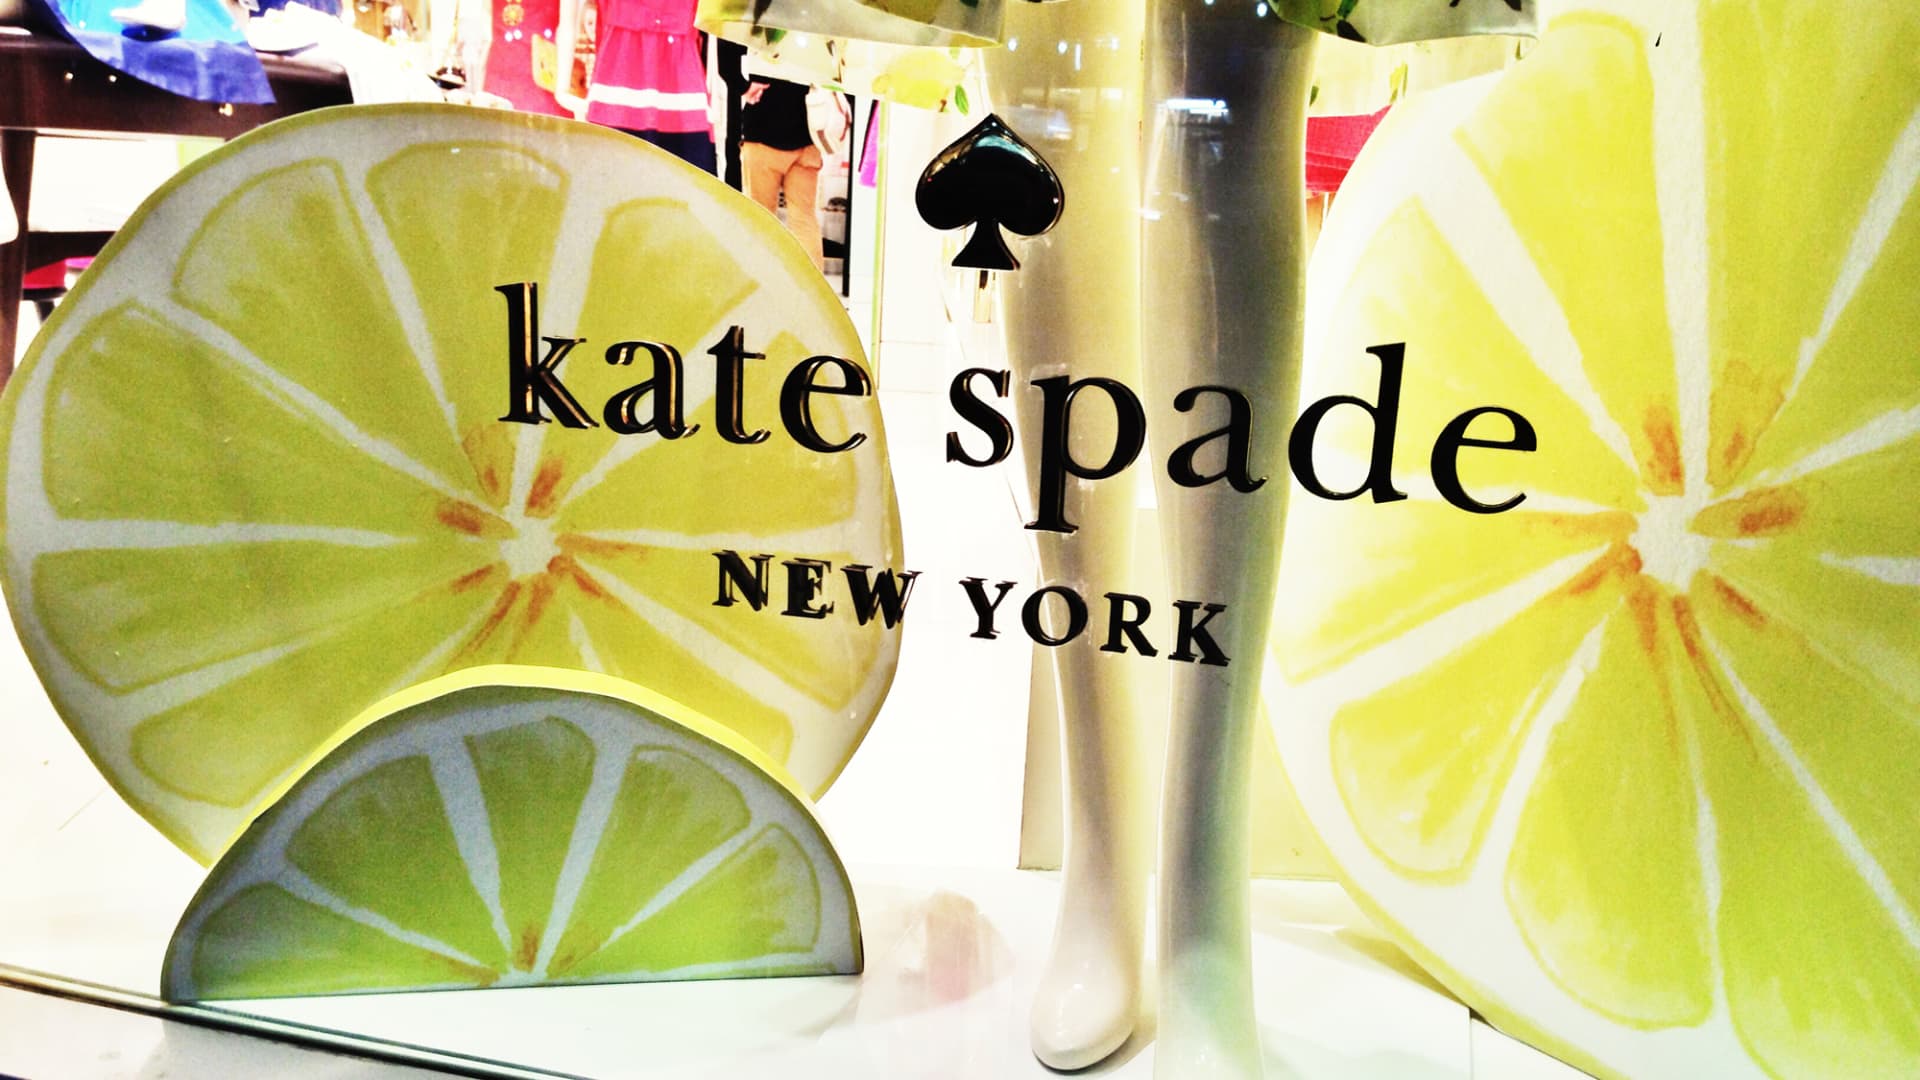 Tapestry shares crater after disappointing sales from Kate Spade